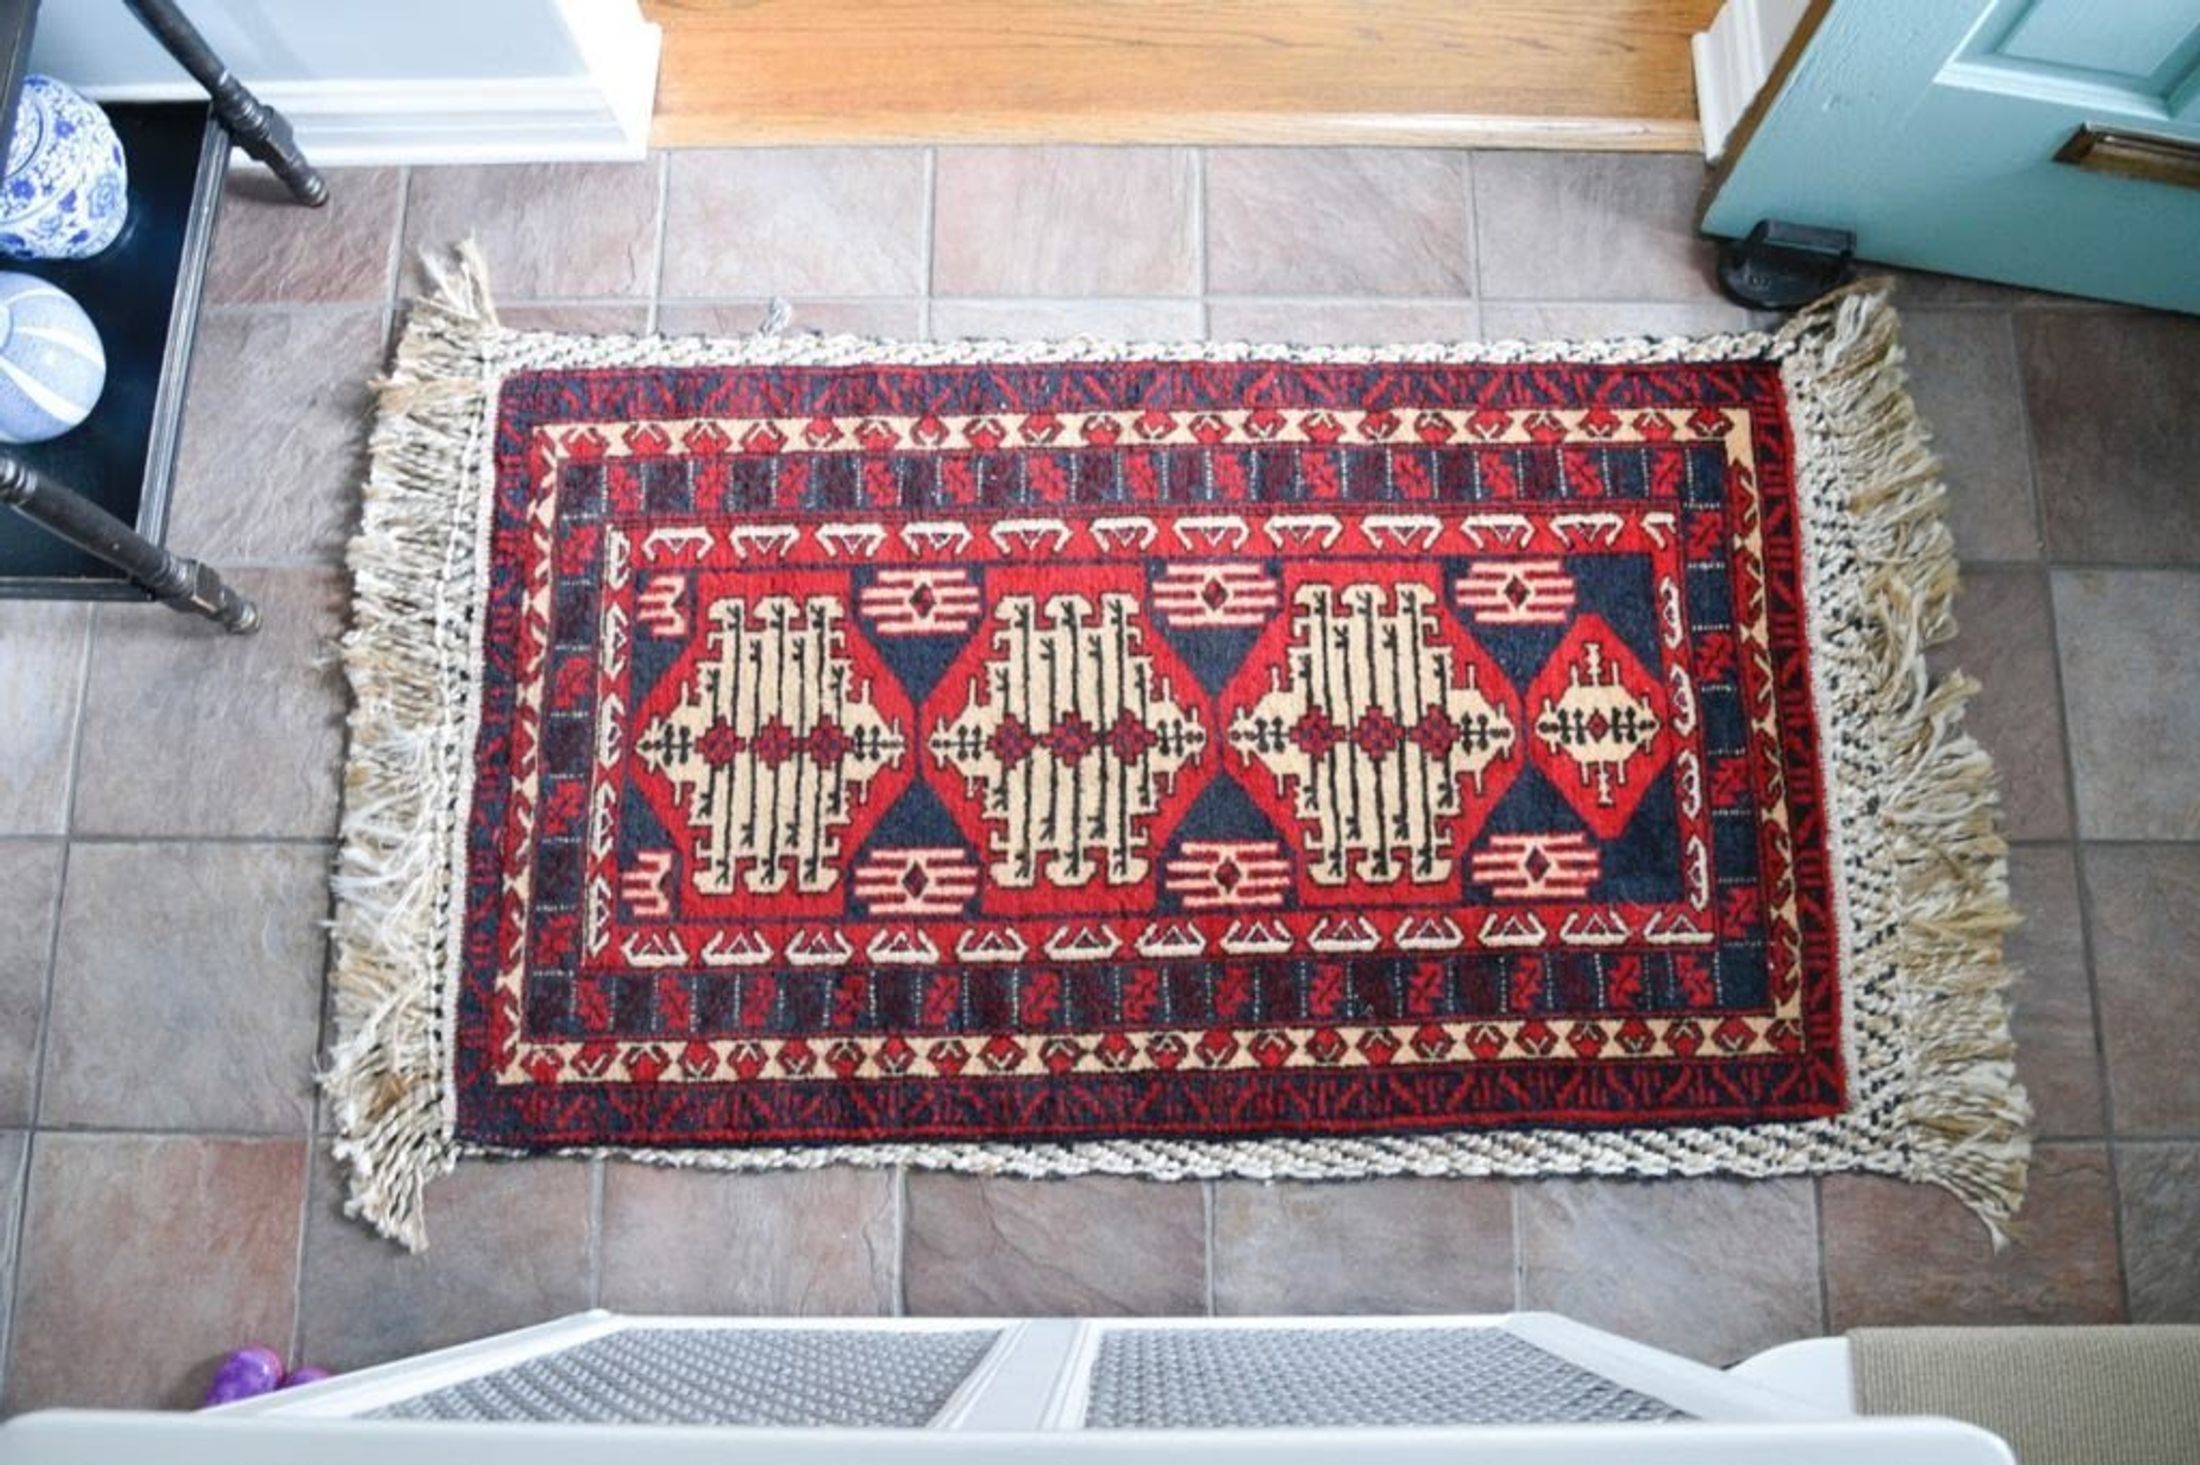 3 Useful Ways to Stop Area Rugs From Sliding